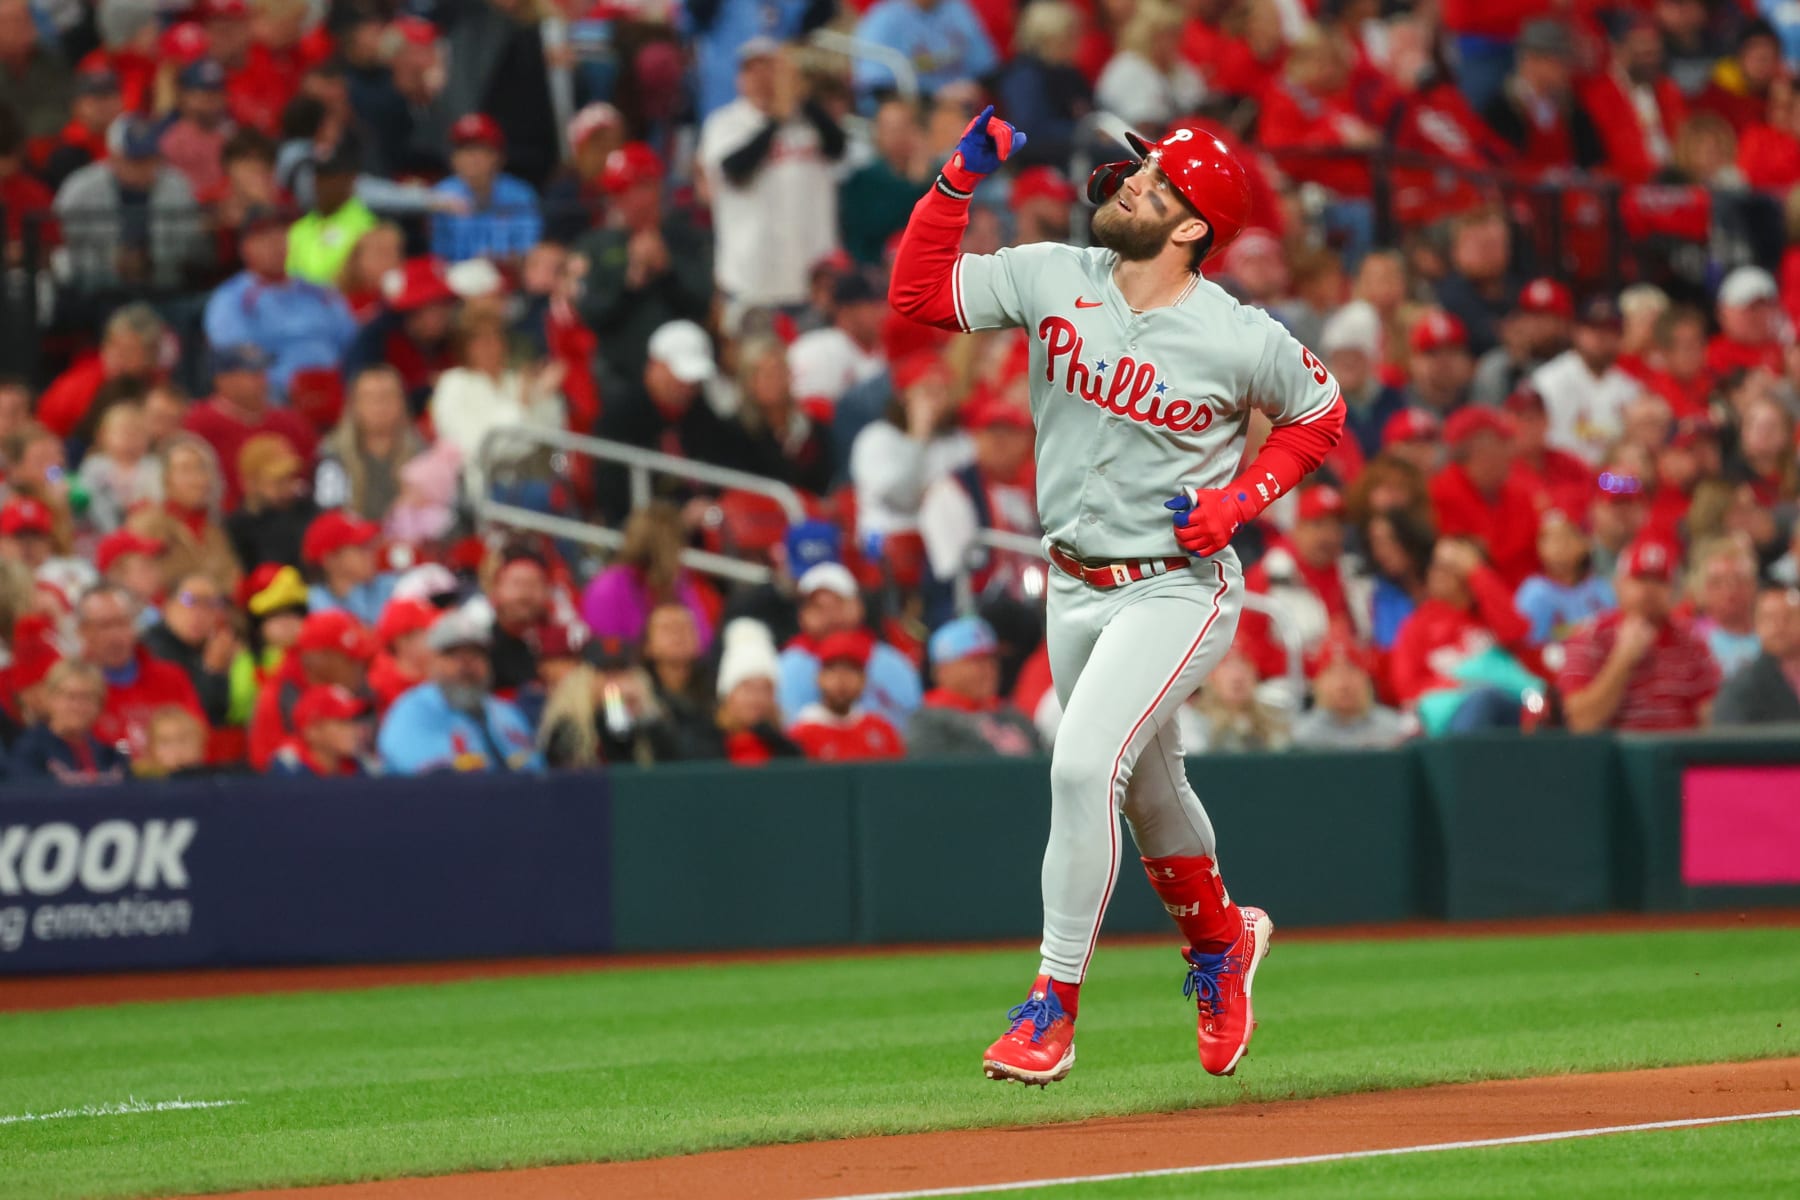 Phillies' pitching depth will test playoff chances